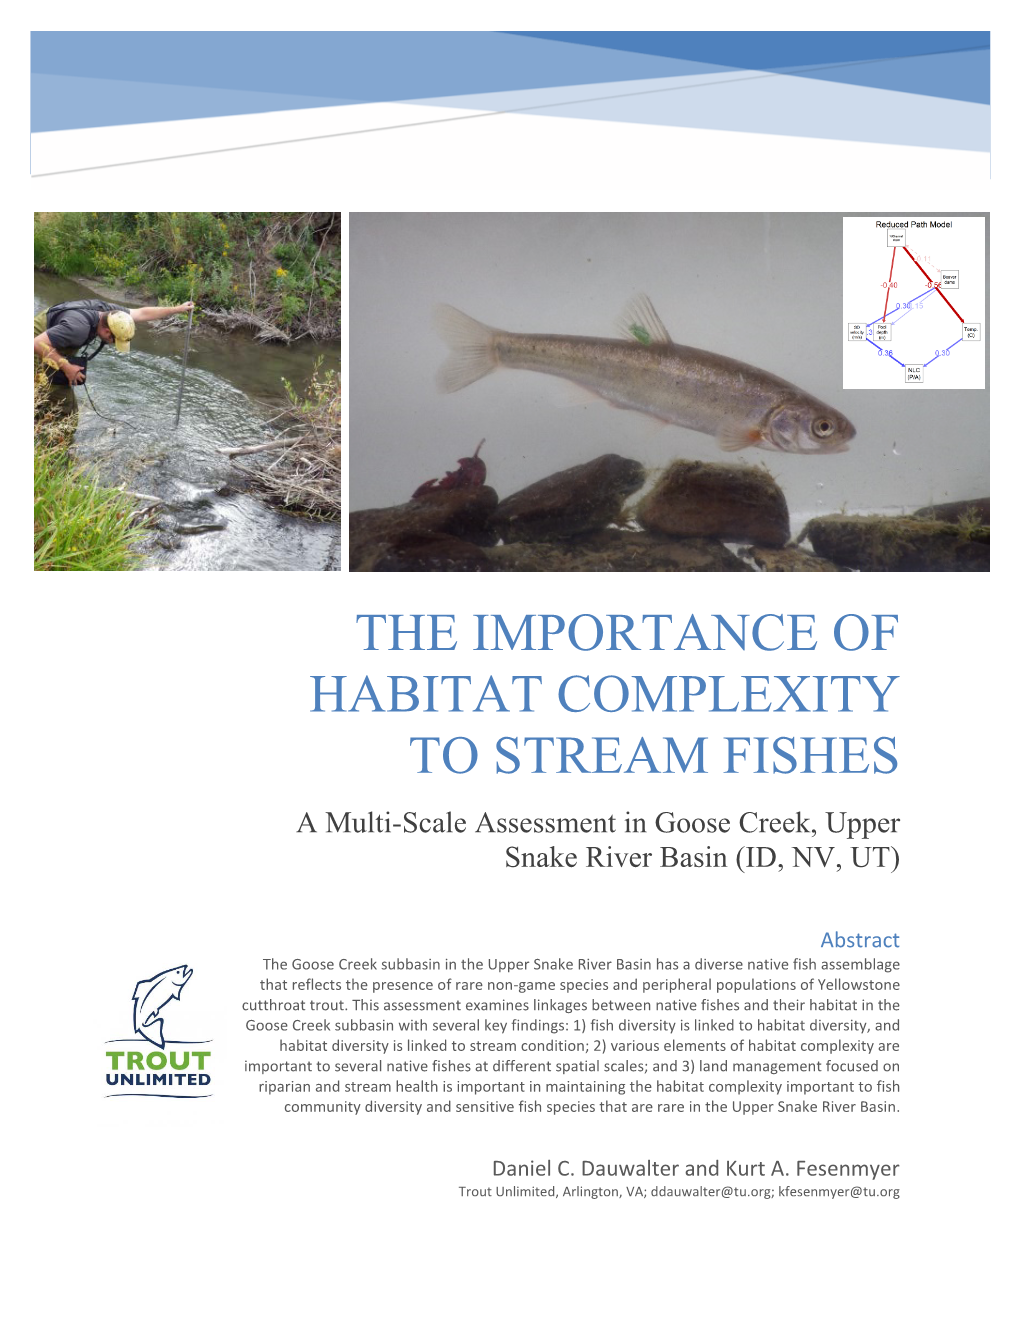 THE IMPORTANCE of HABITAT COMPLEXITY to STREAM FISHES a Multi-Scale Assessment in Goose Creek, Upper Snake River Basin (ID, NV, UT)